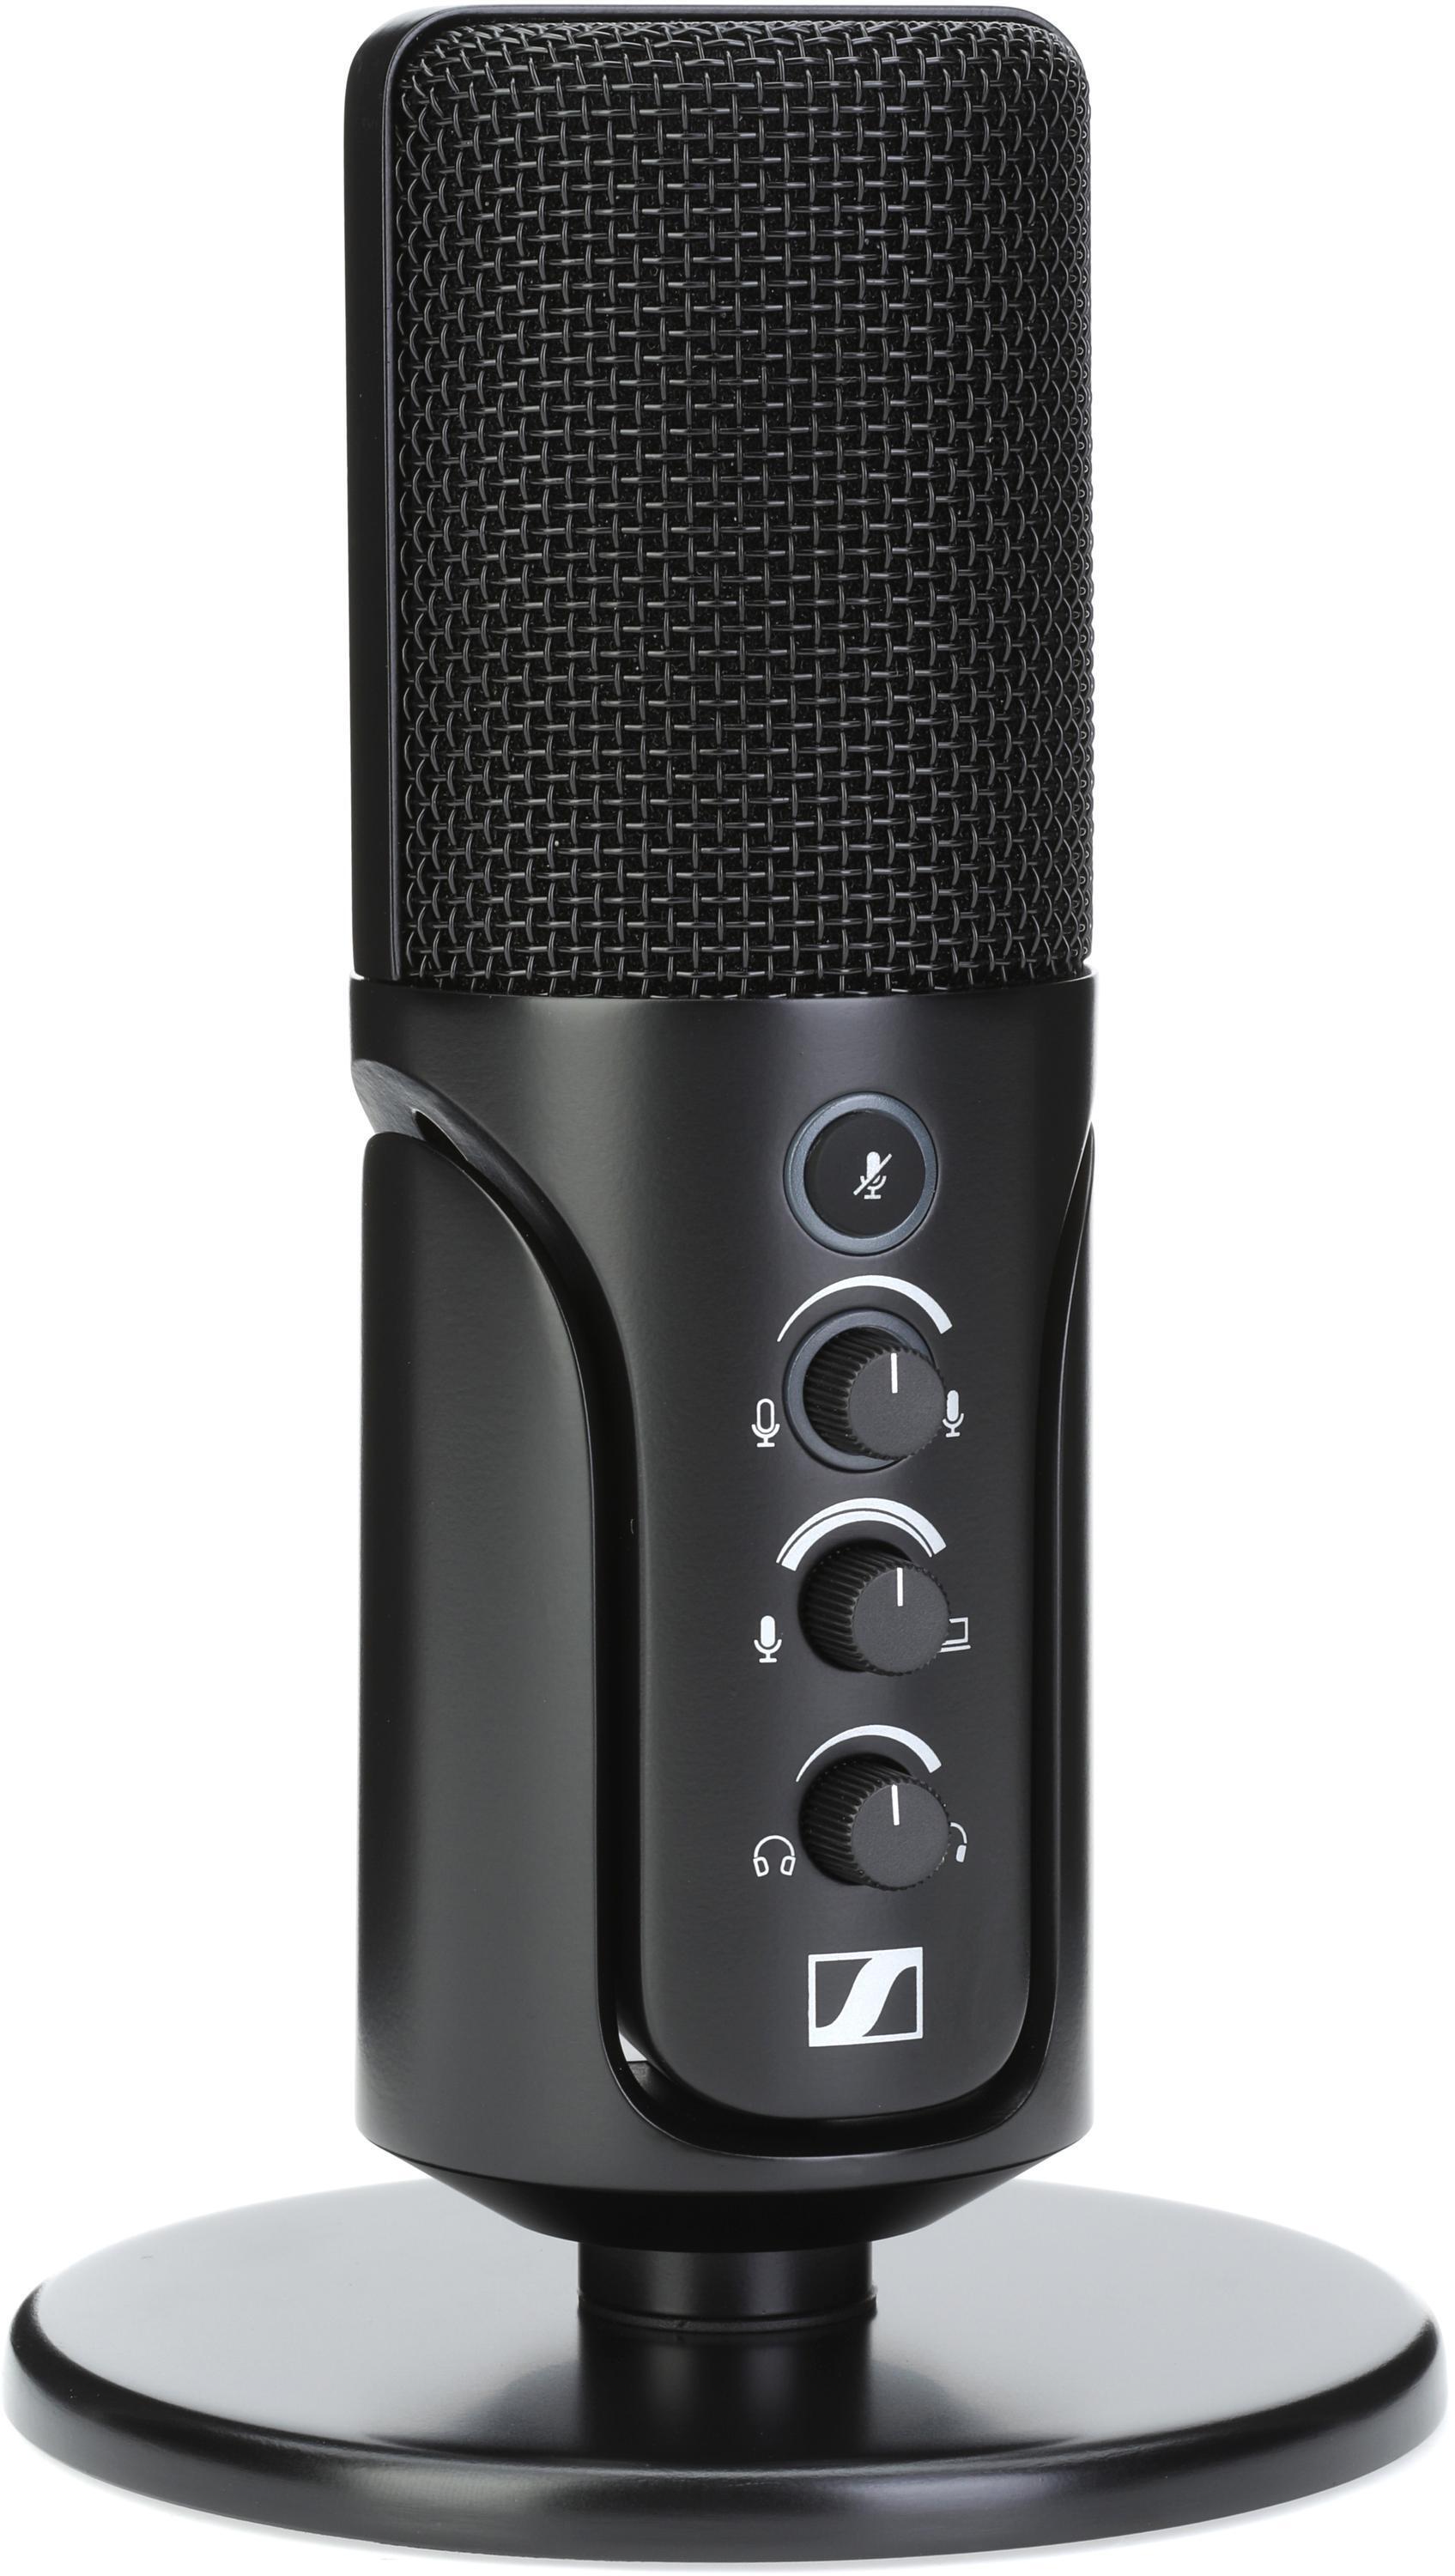 Sennheiser Profile USB Microphone for Streaming and Podcasting